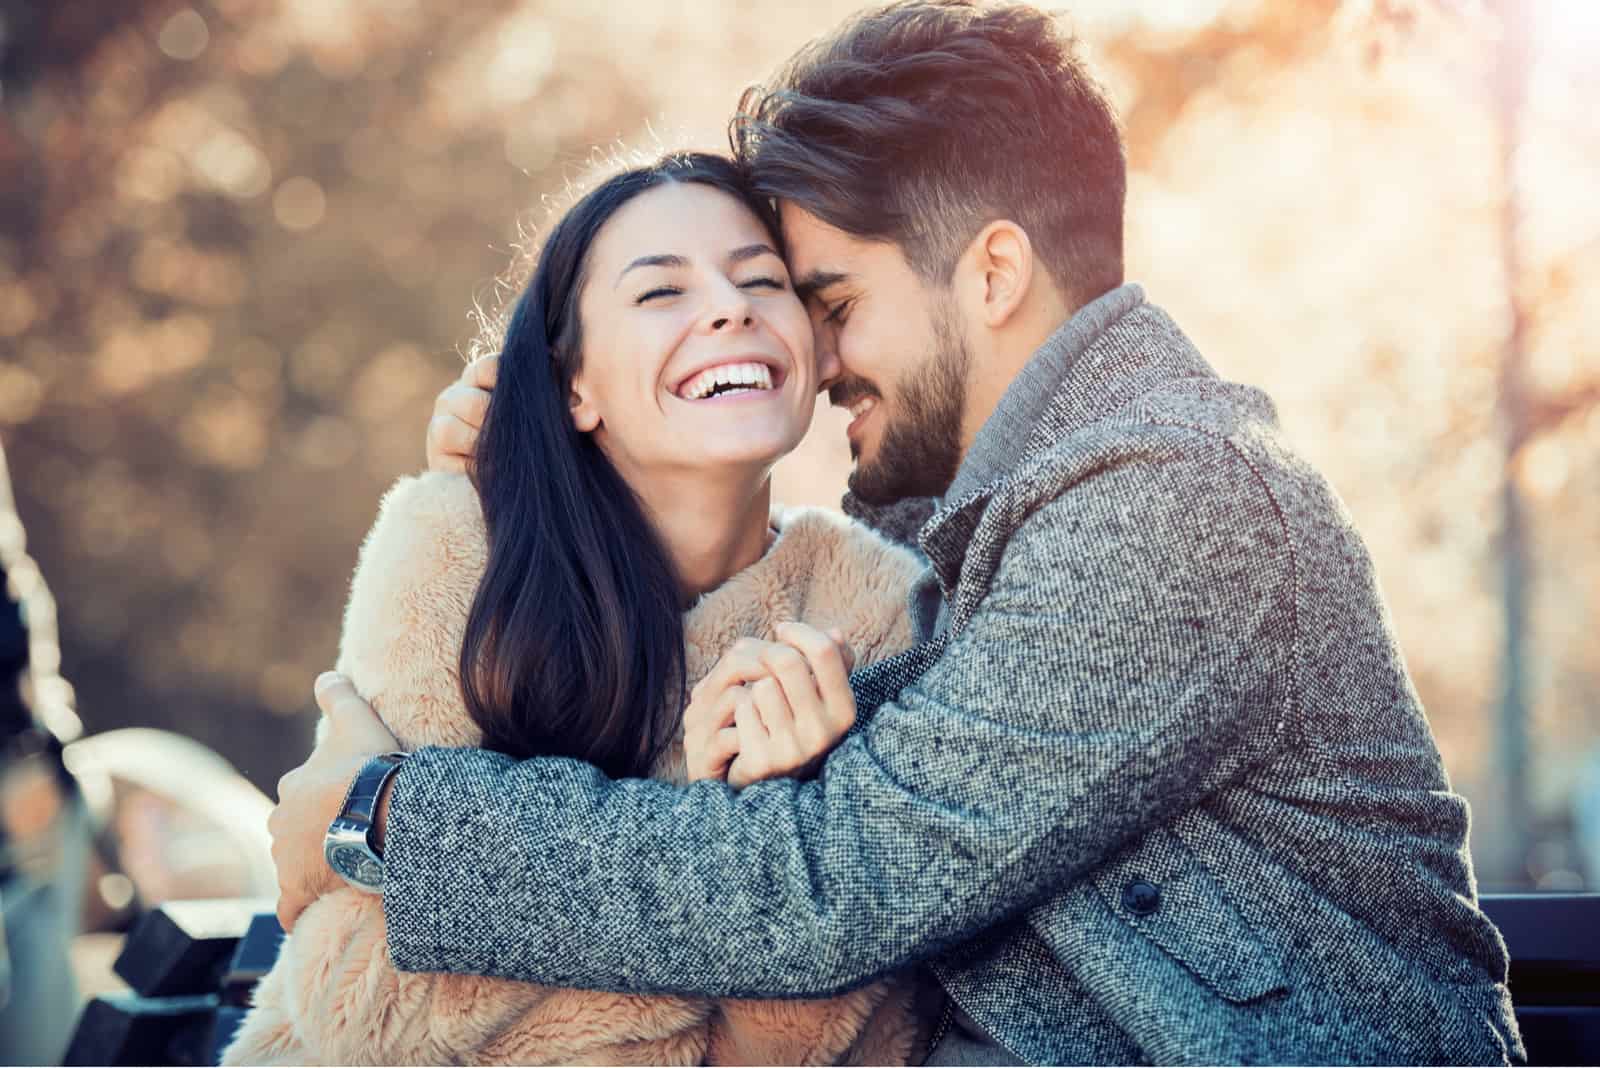 the man and woman embrace laughing